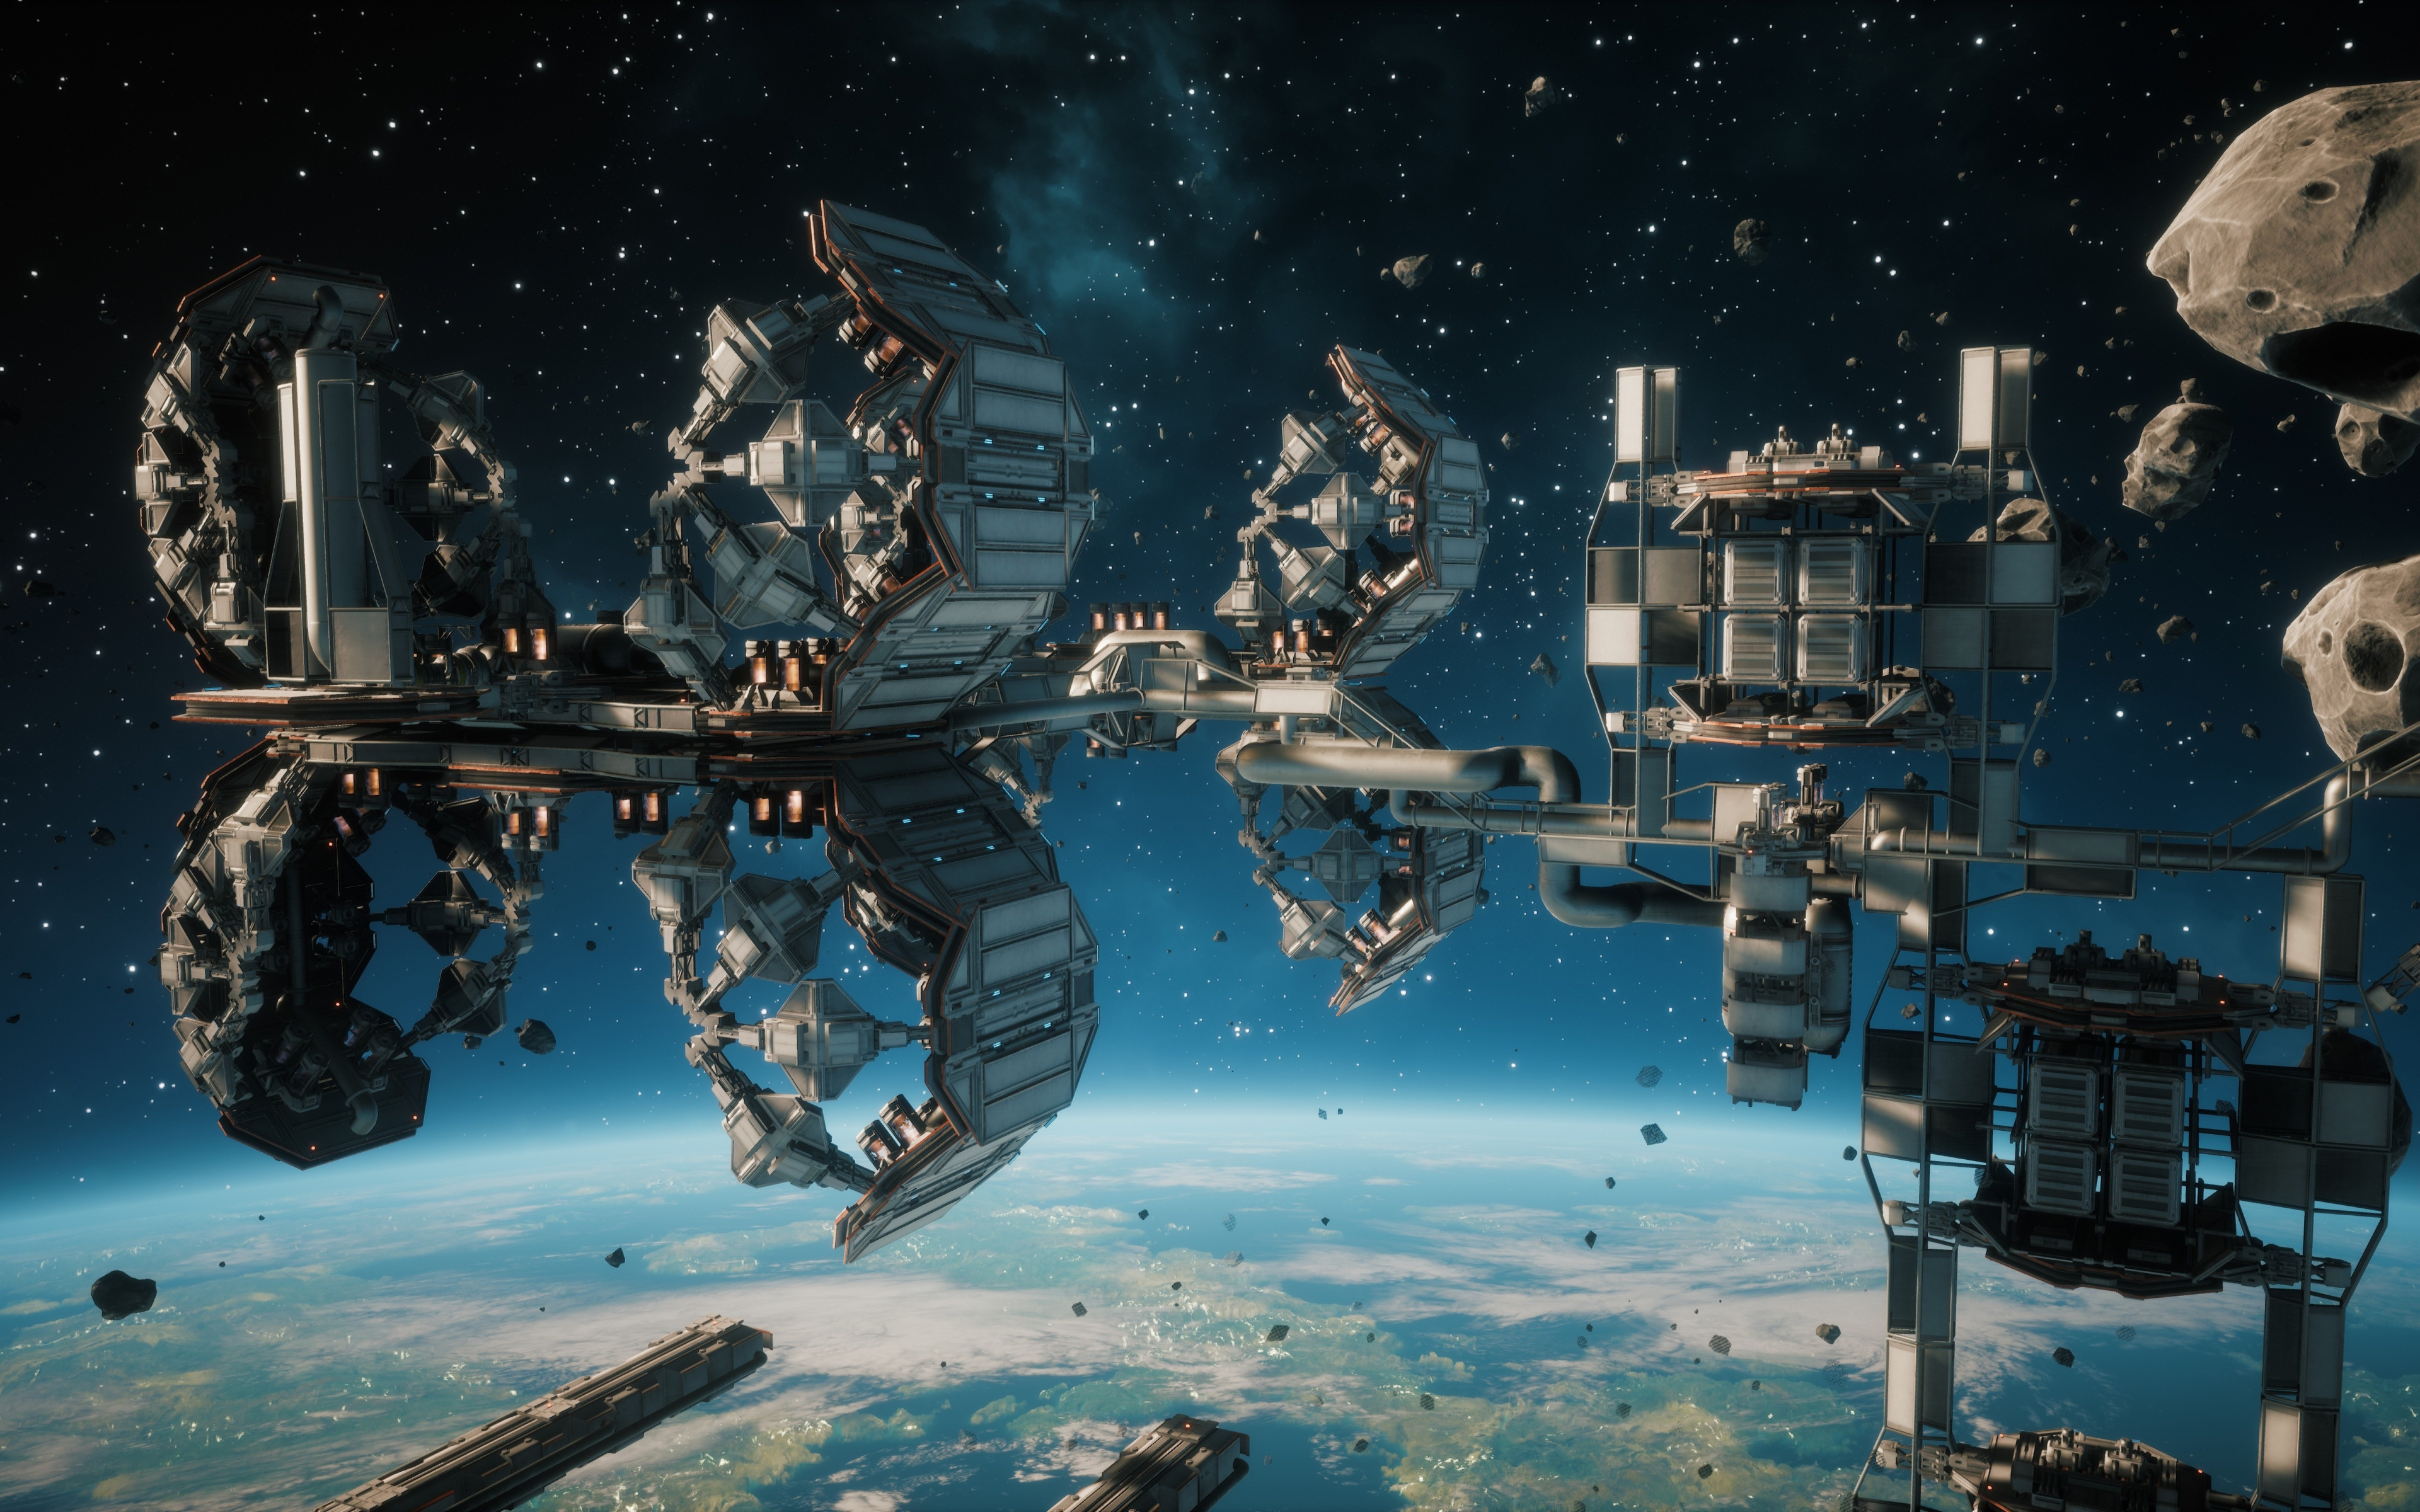 Download 3840x2400 wallpaper  space  video game everspace 